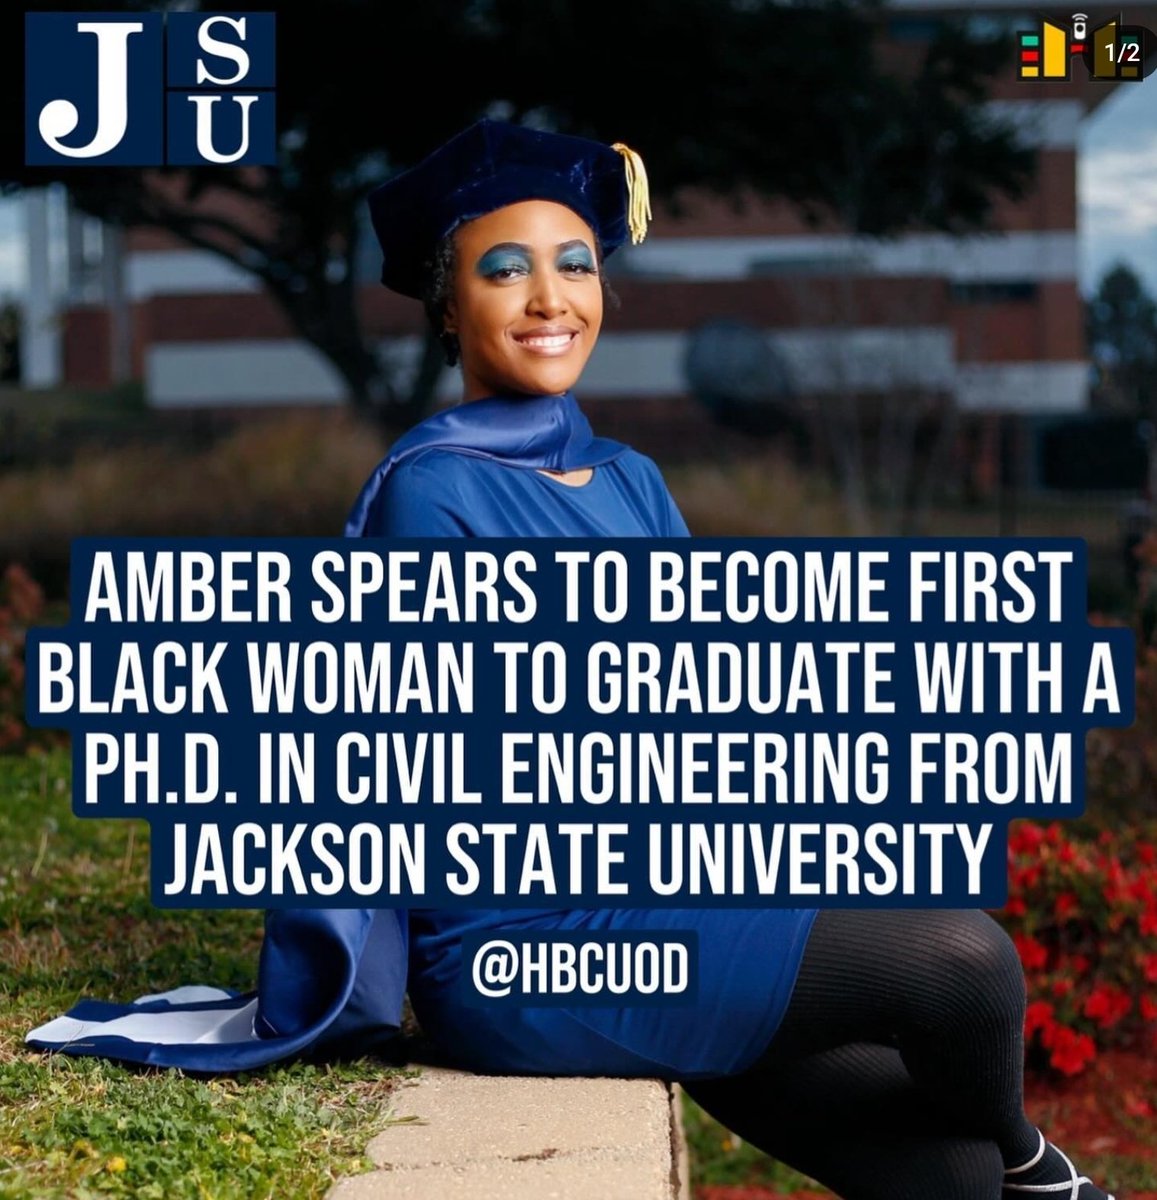 #JSUGrad24: Congratulations to Dr. Amber Spears for becoming the first African-American woman to earn a Ph.D in Civil Engineering at Jackson State University.